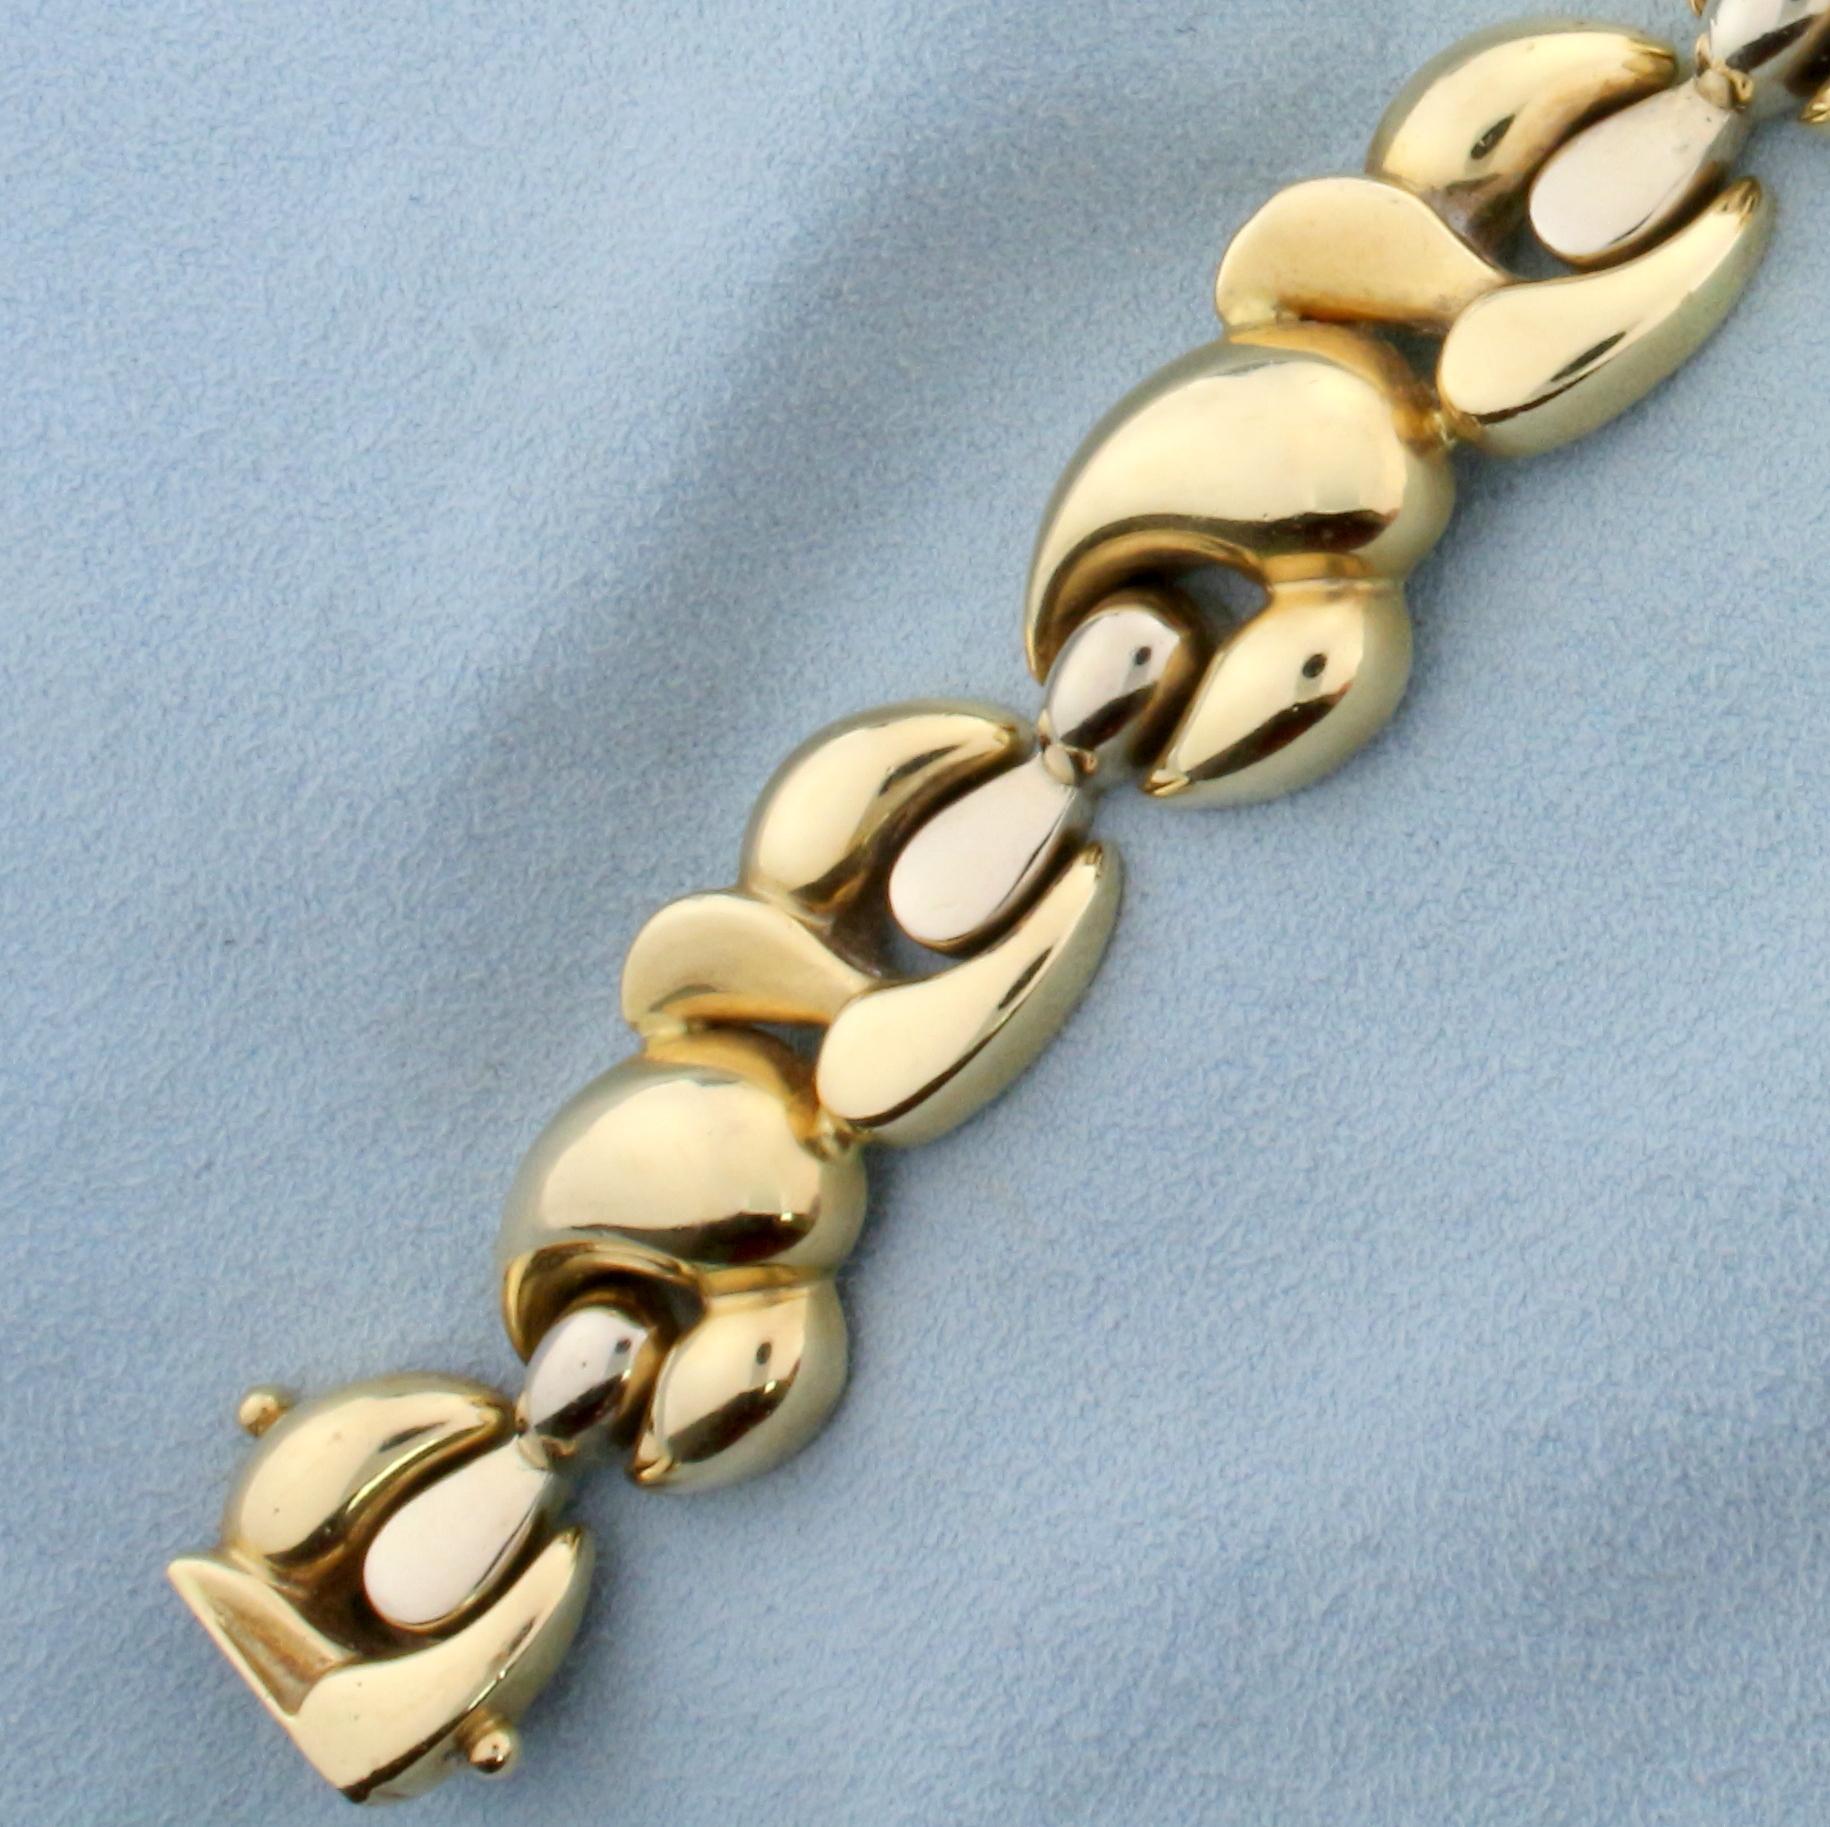 Two Tone Italian Made Designer Link Statement Bracelet In 14k Yellow And White Gold